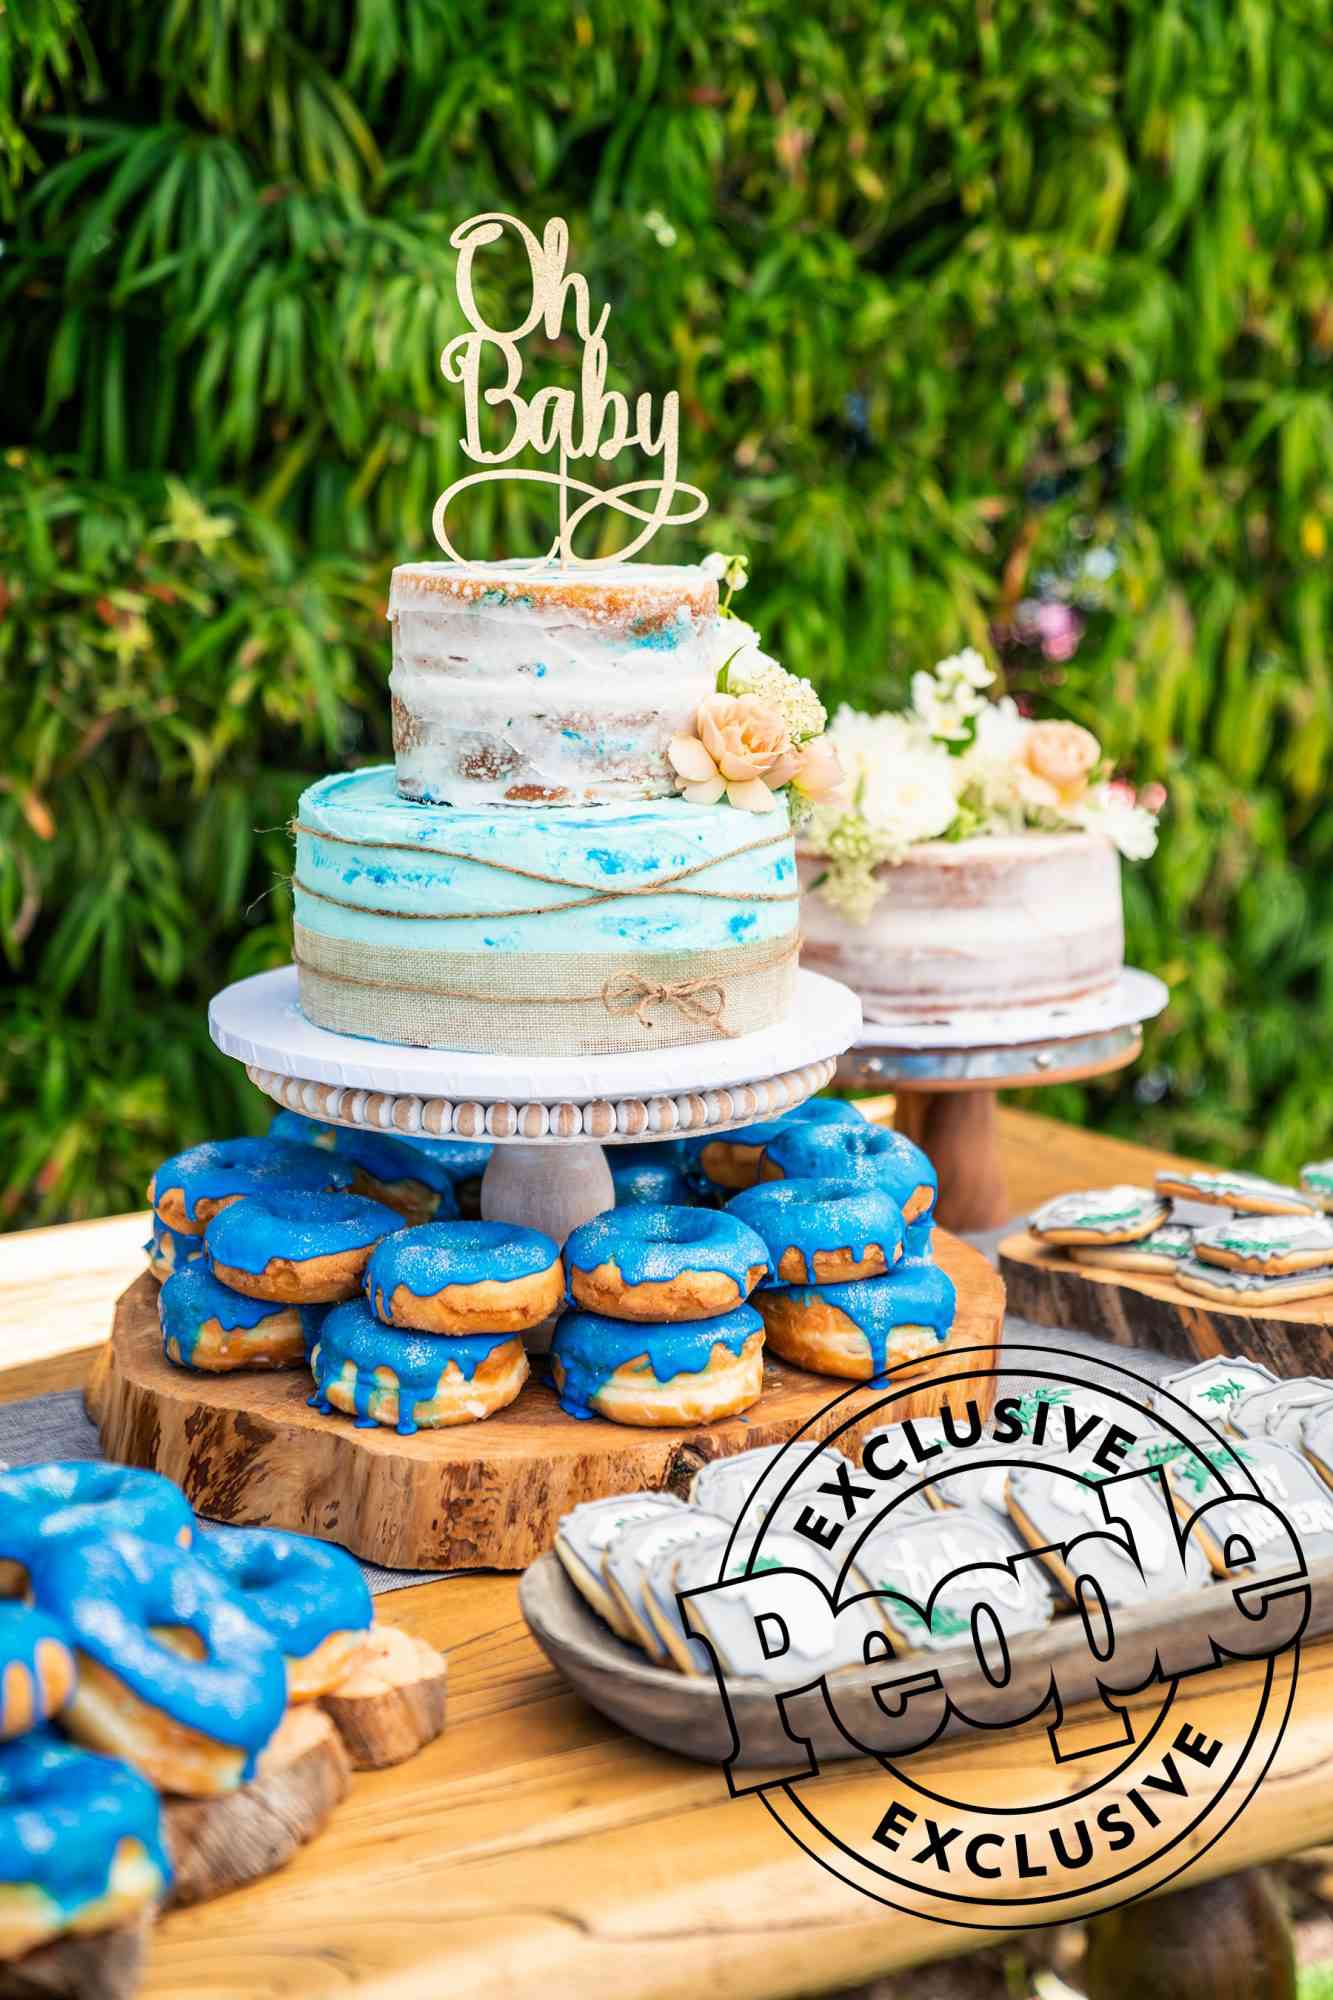 Christina Anstead celebrates her baby shower with friends and family in Newport Beach, CA., as seen on Christina on the Coast.